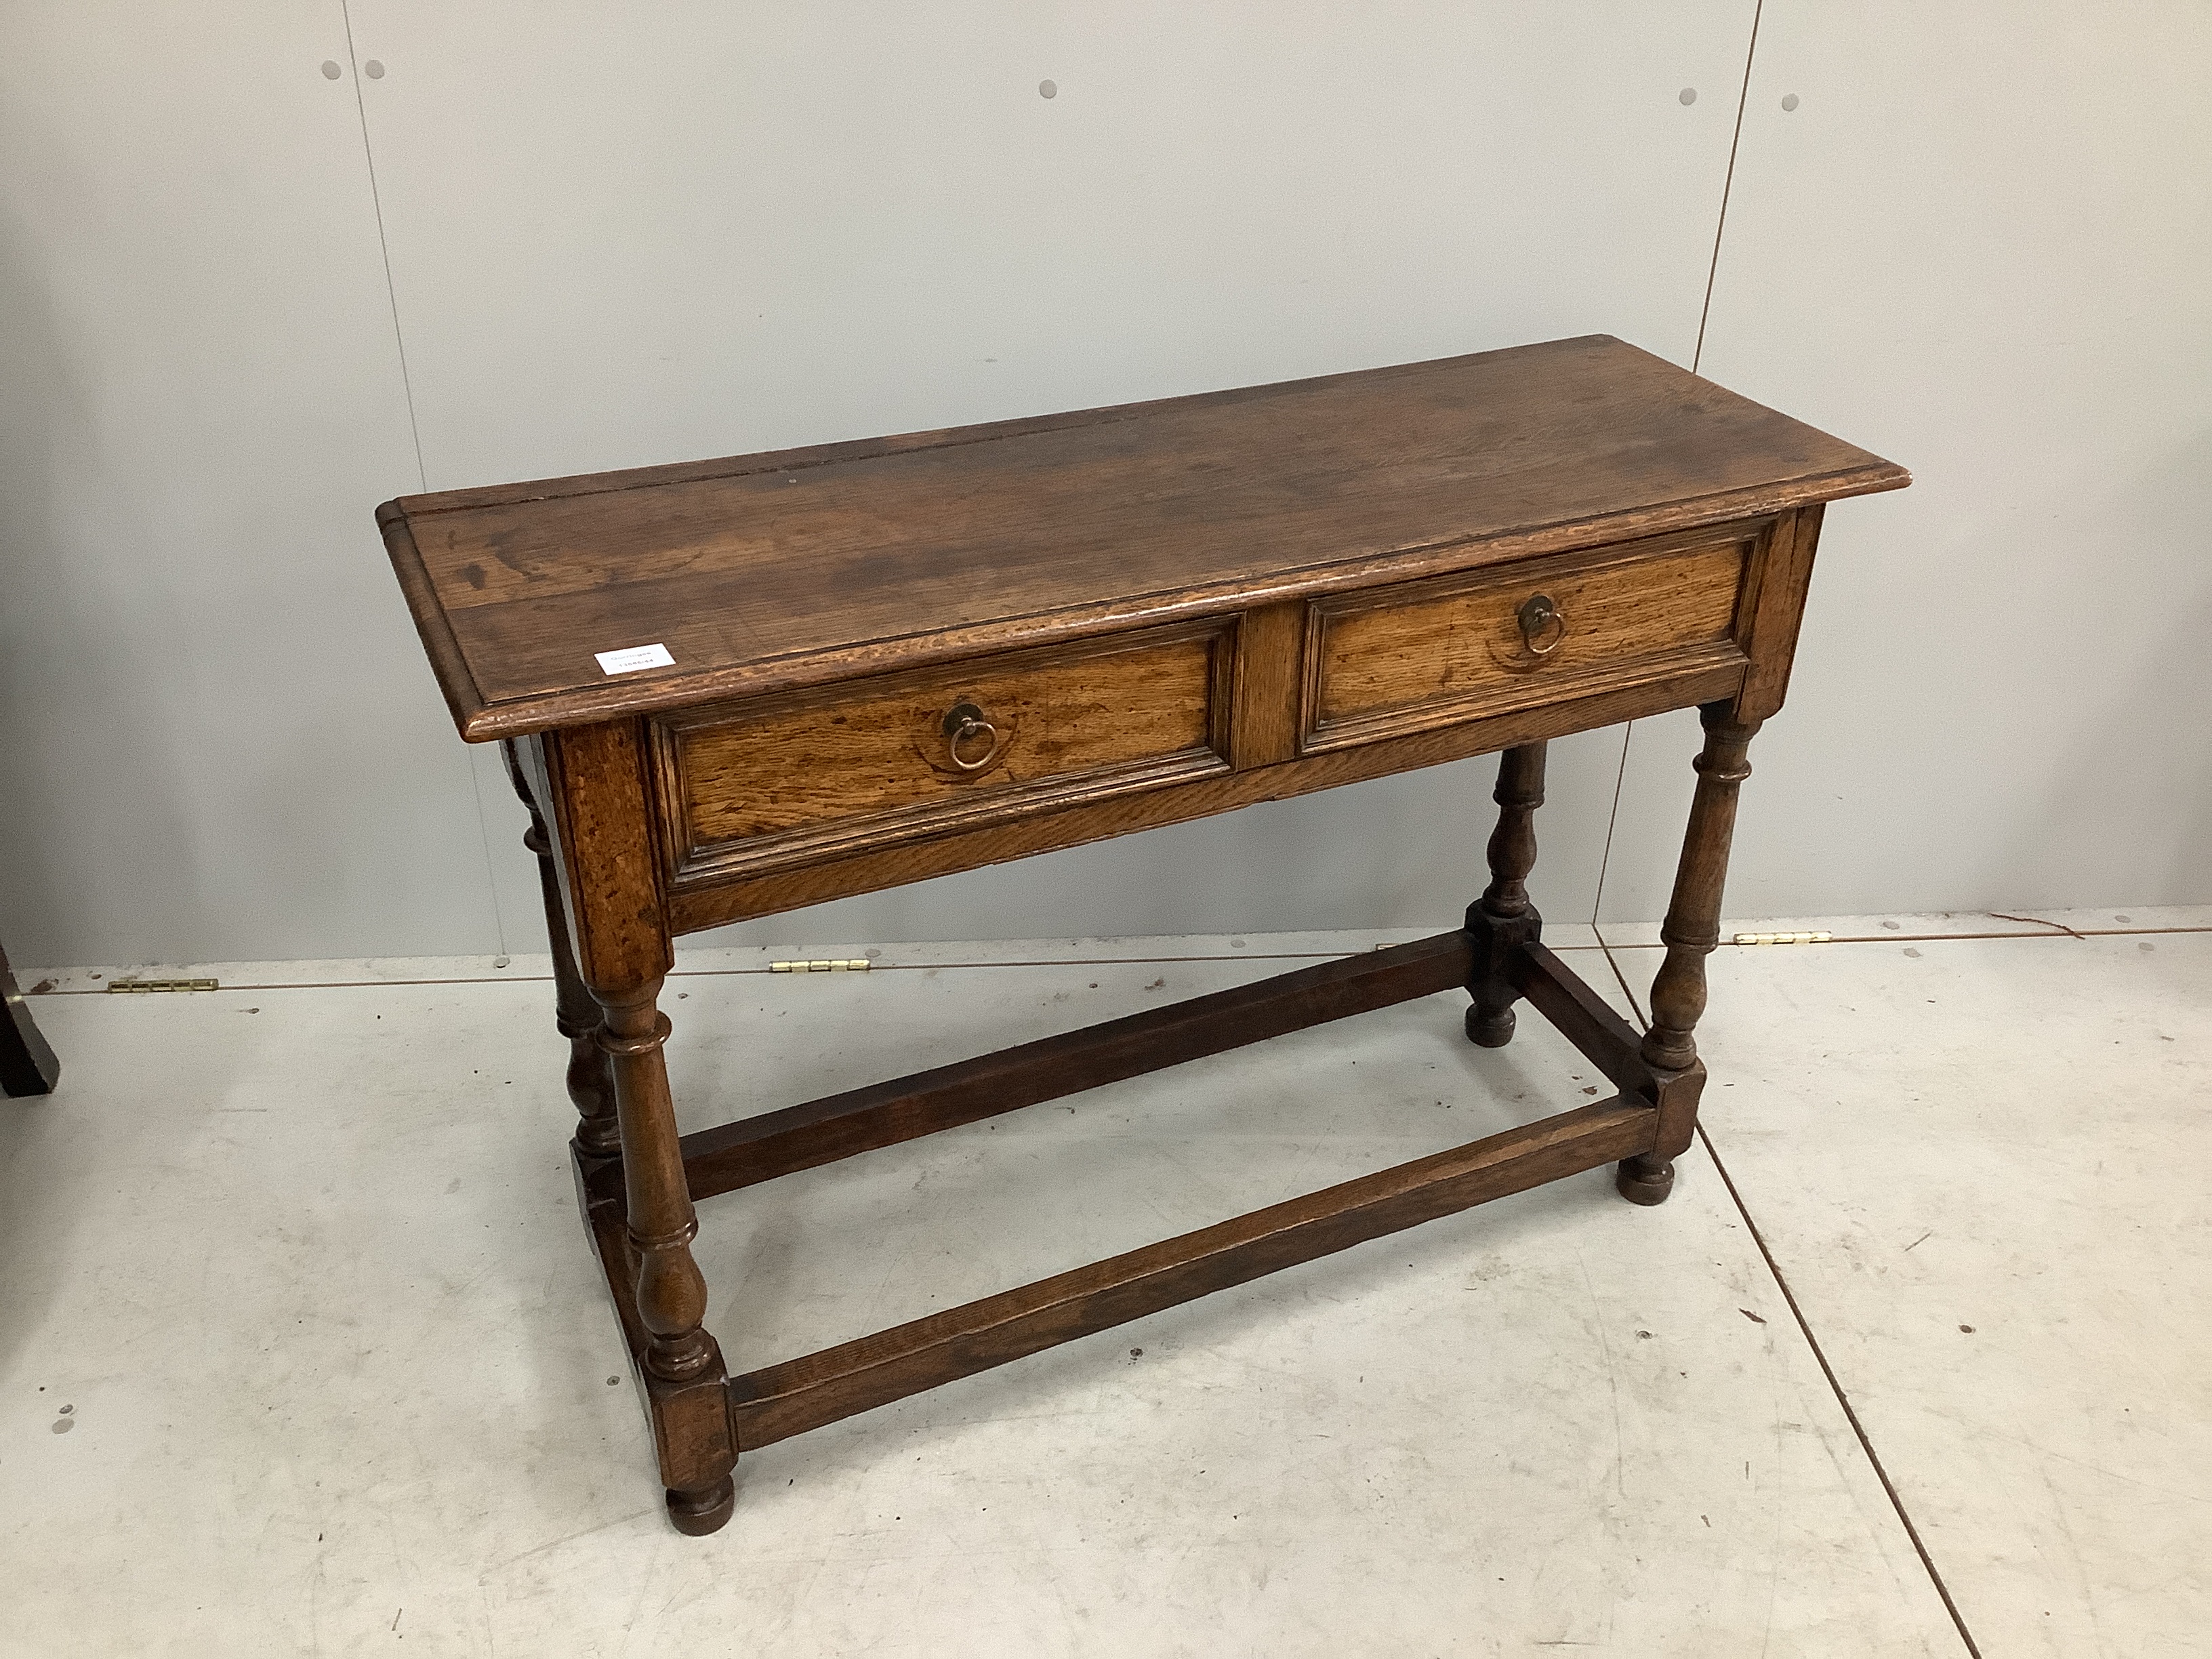 An early 18th century style oak two drawer side table, width 107cm, depth 36cm, height 72cm